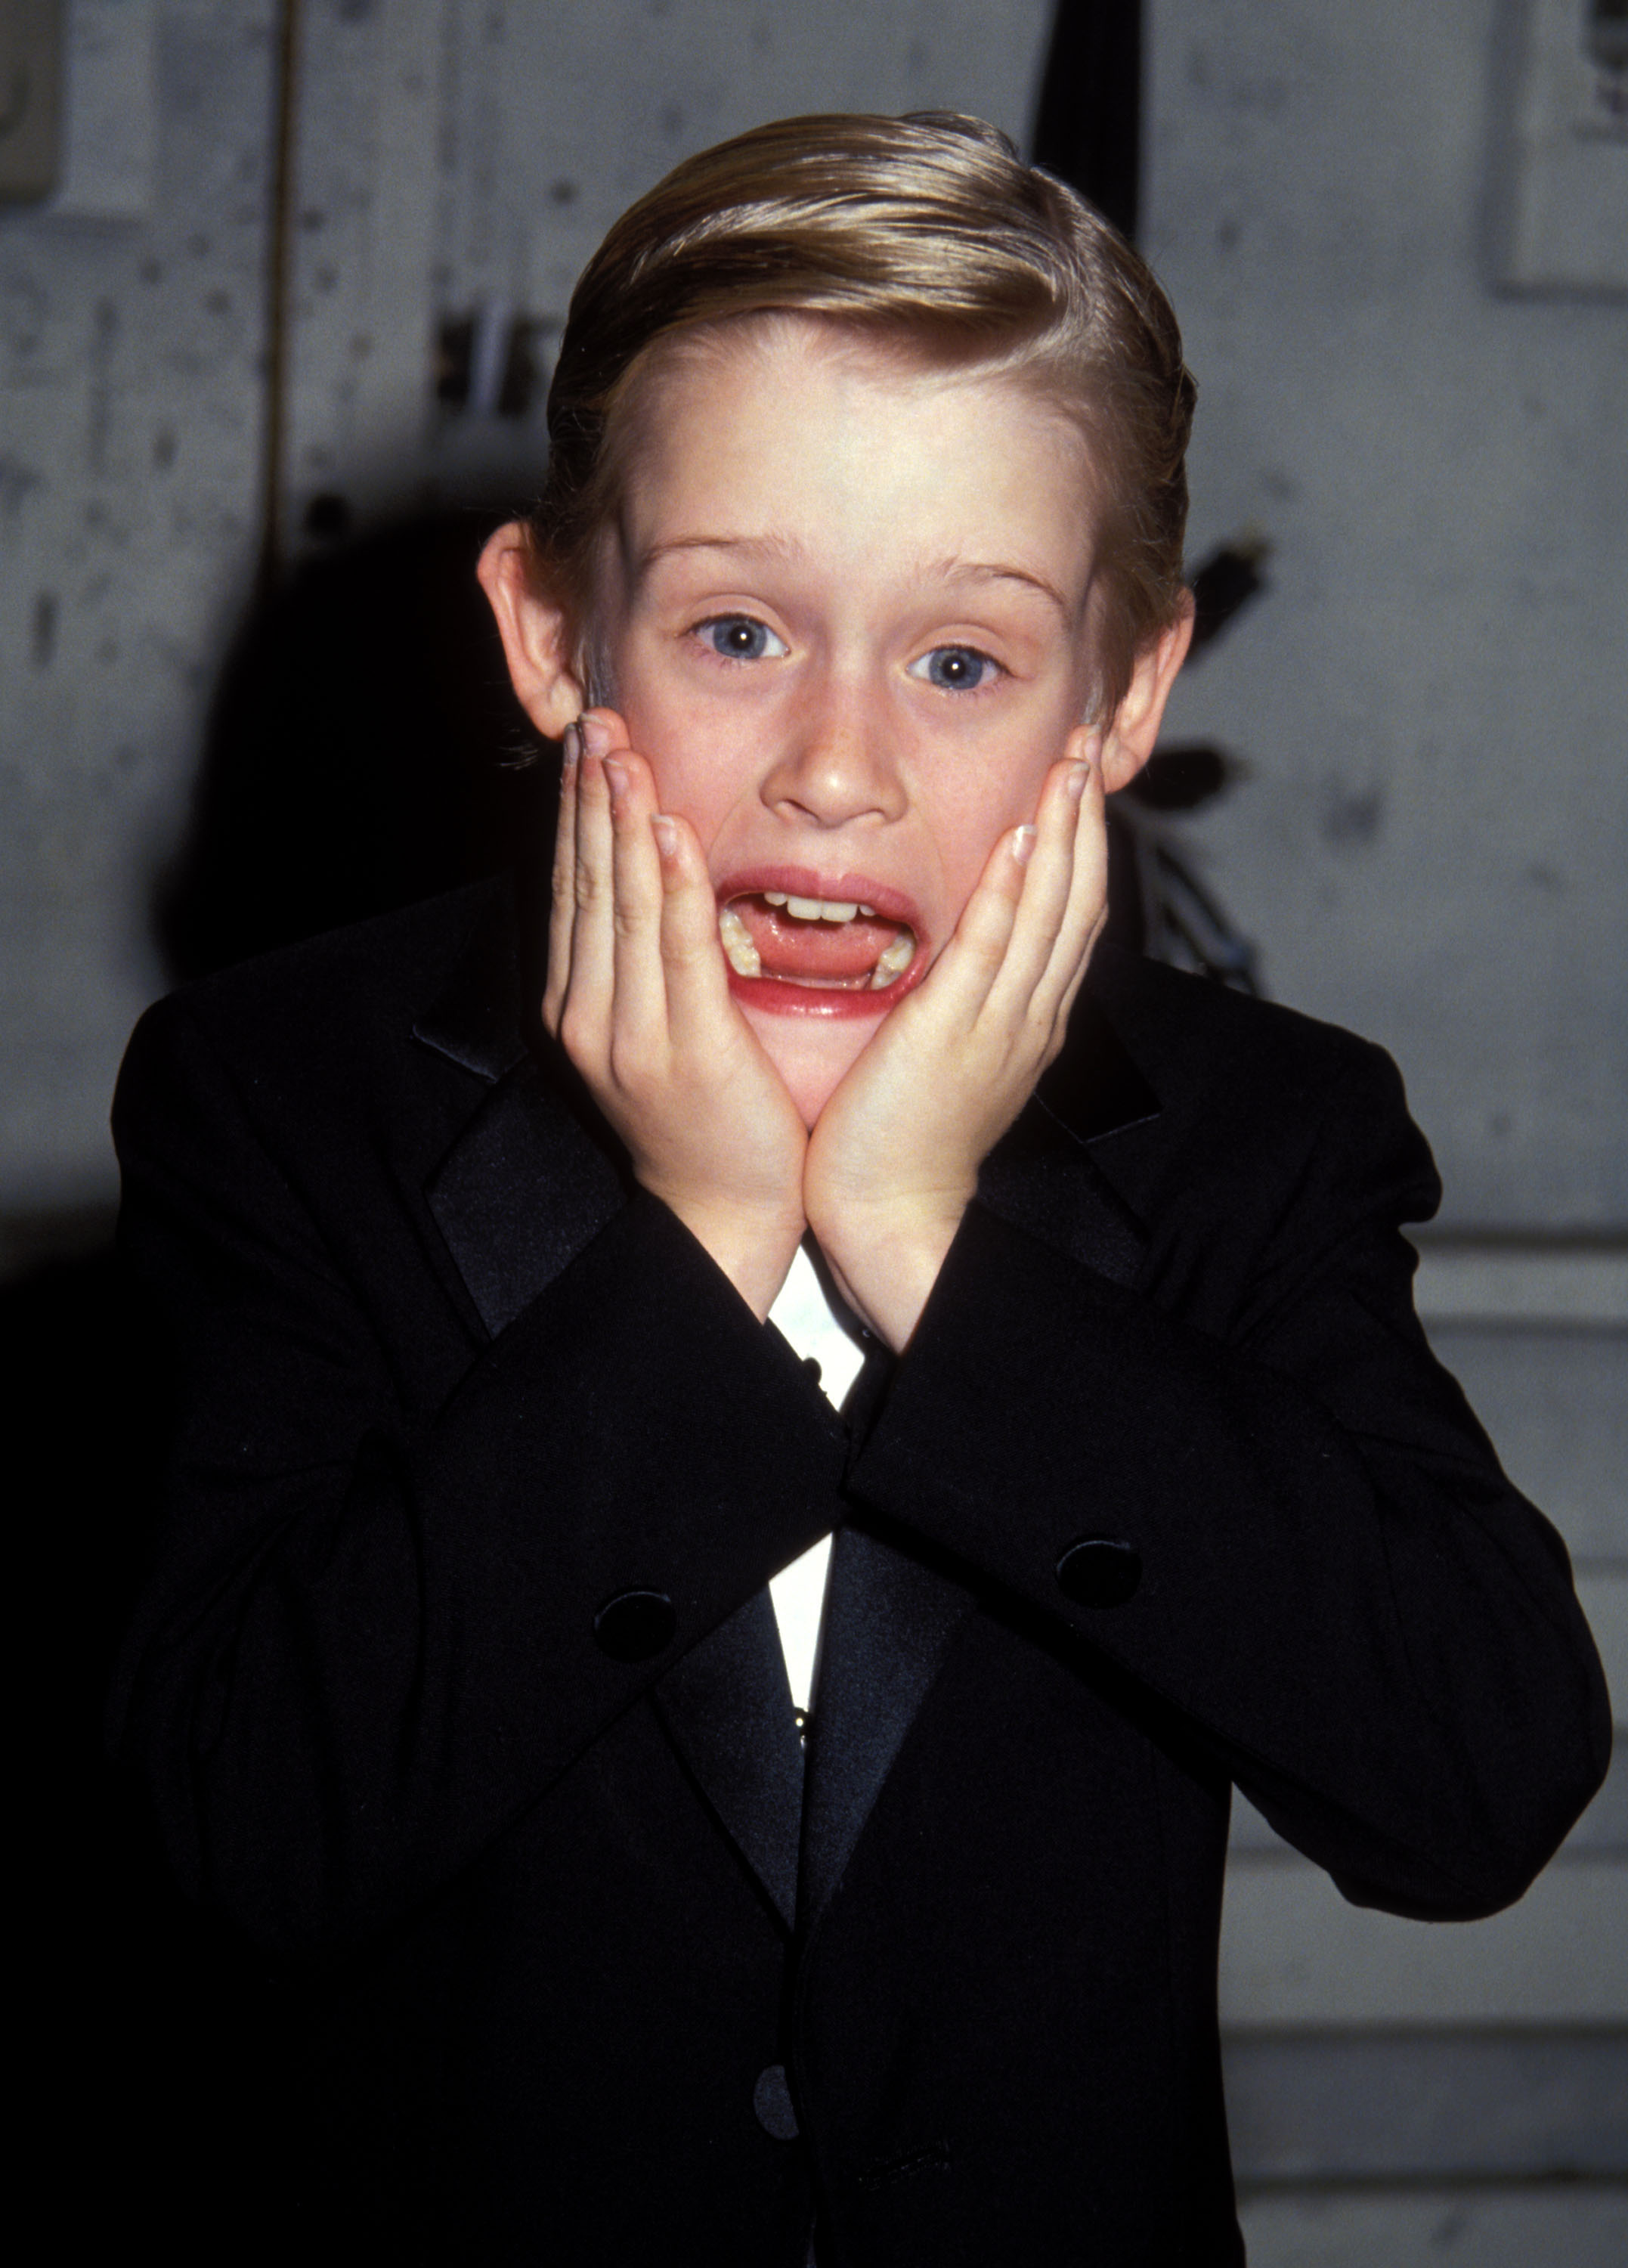 Macaulay Culkin in Hollywood in 1991 |  Source: Getty Images